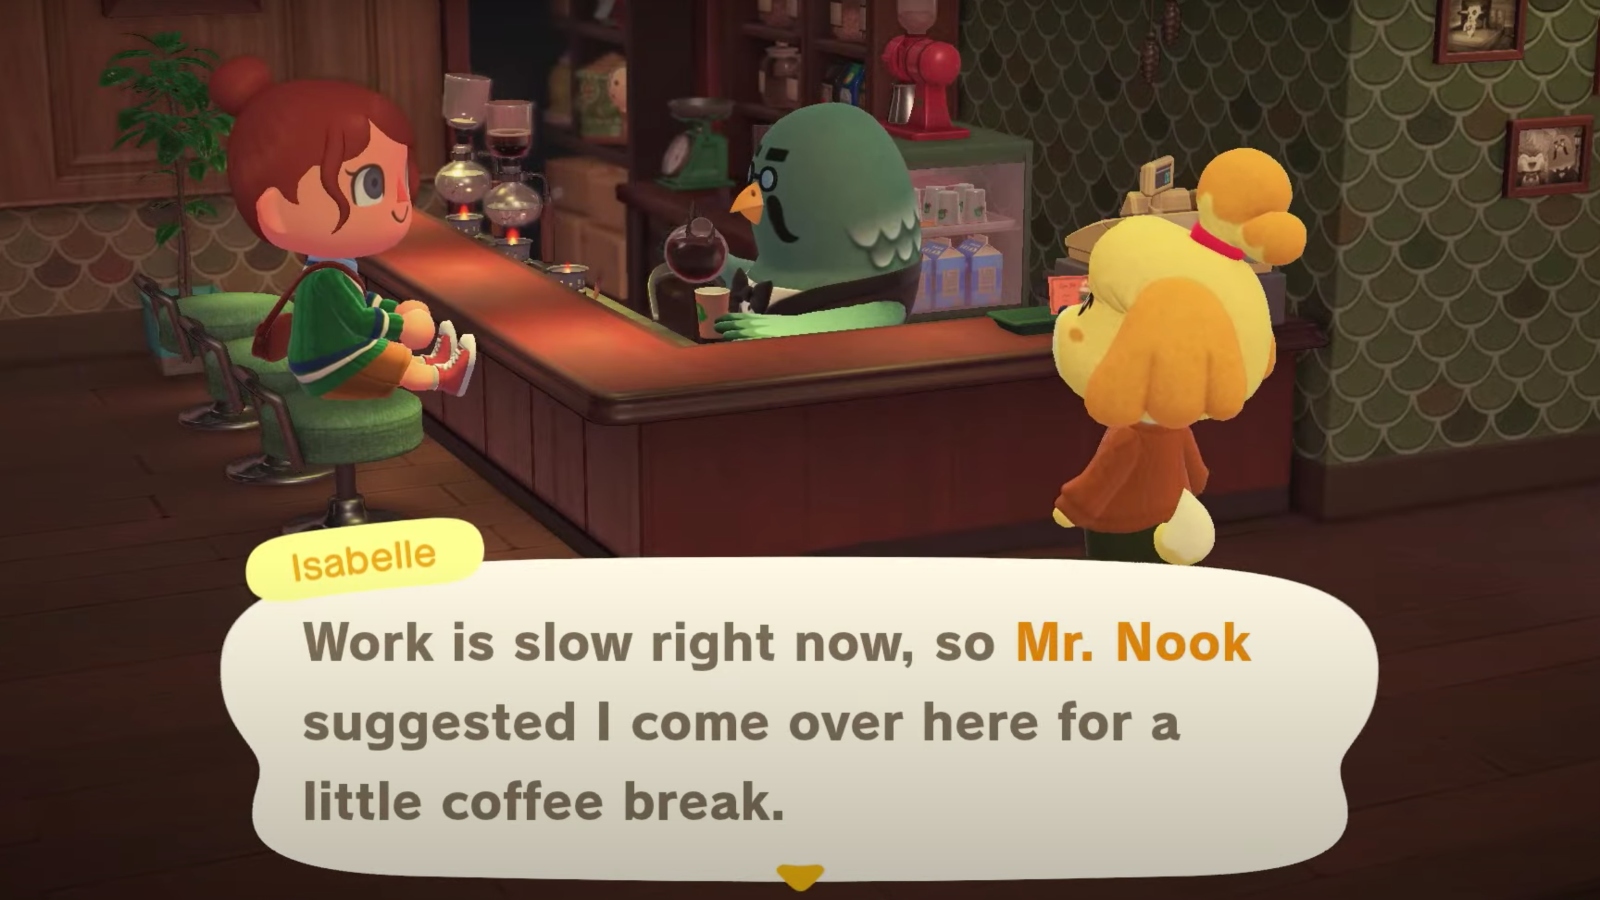 Animal Crossing: New Horizons Gets Final Major Free Update And Paid Expansion Next Month